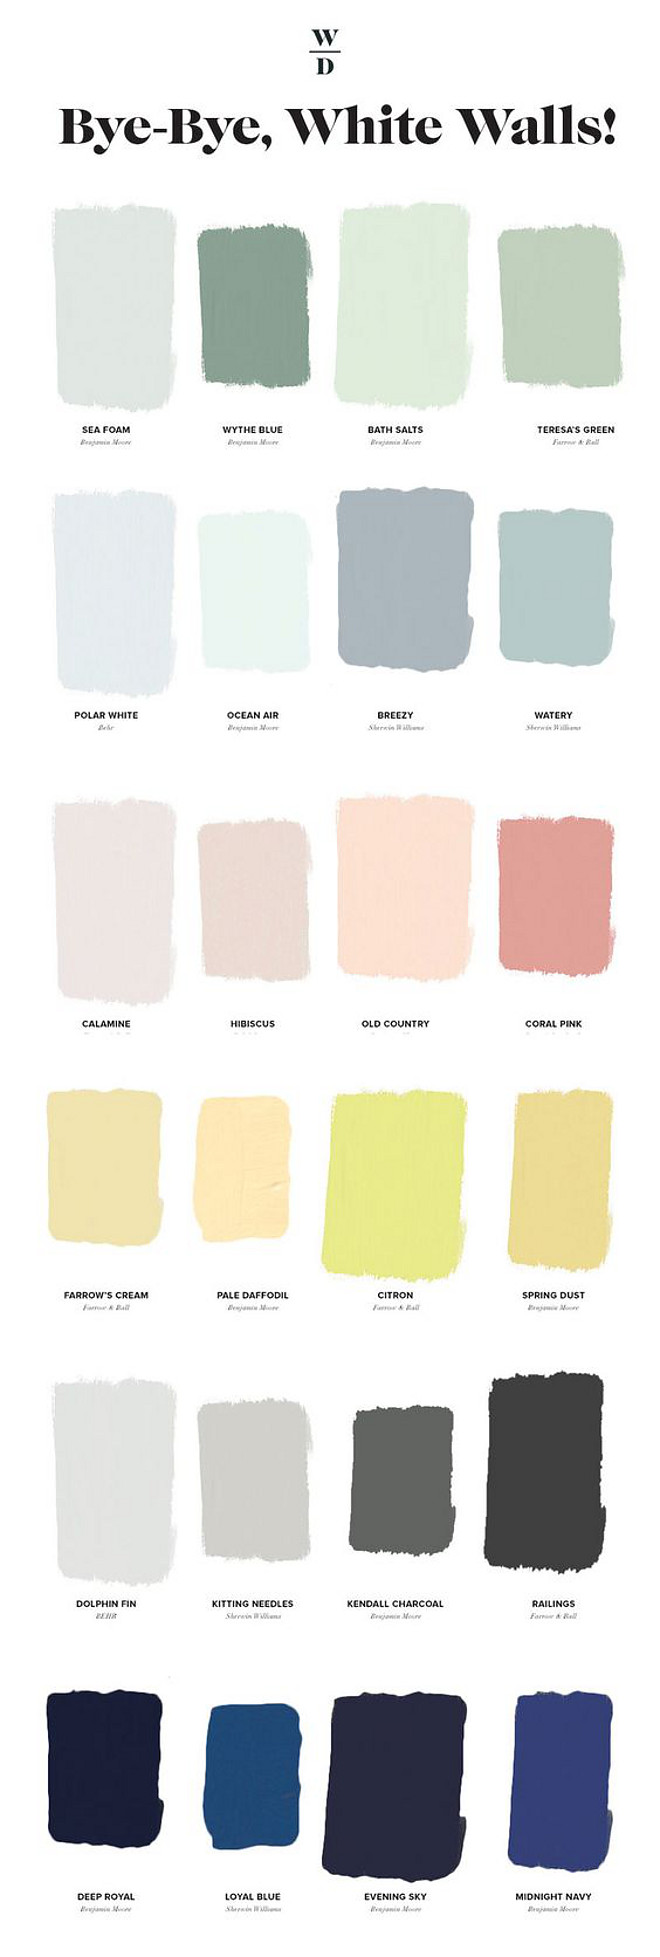 Colorful Paint color Ideas. A collections of greens, blues, reds, yellows, greys and blue paint colors. Benjamin Moore Sea foam 2123-60. Benjamin Moore Wythe Blue. Benjamin Moore Bath Salts. Farrow and Ball Teresa's Green No. 236. Behr Polar White. Benjamin Moore Ocean Air. Sherwin Williams Breezy. Sherwin Williams Watery. Farrow and Ball Calamine No.230. Benjamin Moore Hibiscus. Benjamin Moore OC-76 Old Country. Benjamin Moore 2003-50 Coral Pink. Farrow and Ball Farrow's Cream. Benjamin Moore Pale Daffodil. Farrow and Ball Citron. Benjamin Moore Spring Dust. Behr Dolphin Fin. Sherwin Williams SW7672 Knitting Needles. Benjamin Moore Kendall Charcoal. Farrow and Ball Railings. Benjamin Moore Deep Royal. Sherwin Williams Loyal Blue. Benjamin Moore Evening Sky. Benjamin Moore Midnight Navy. colorful-paint-color-ideas #paintcolors #BenjaminMooreSeafoam #BenjaminMooreWytheBlue #BenjaminMooreBathSalts #FarrowandBallTeresasGreenNo236 #BehrPolarWhite #BenjaminMooreOceanAir #SherwinWilliamsBreezy #SherwinWilliamsWatery #FarrowandBallCalamineNo230 #Benjamin MooreHibiscus #BenjaminMooreOC76OldCountry #BenjaminMoore2003-50CoralPink #FarrowandBallFarrowsCream #BenjaminMoorePaleDaffodil #FarrowandBallCitron #BenjaminMooreSpringDust #BehrDolphinFin #SherwinWilliamsSW7672KnittingNeedles #BenjaminMooreKendallCharcoal #FarrowandBallRailings #BenjaminMooreDeepRoyal #SherwinWilliamsLoyalBlue #BenjaminMooreEveningSky #BenjaminMooreMidnightNavy